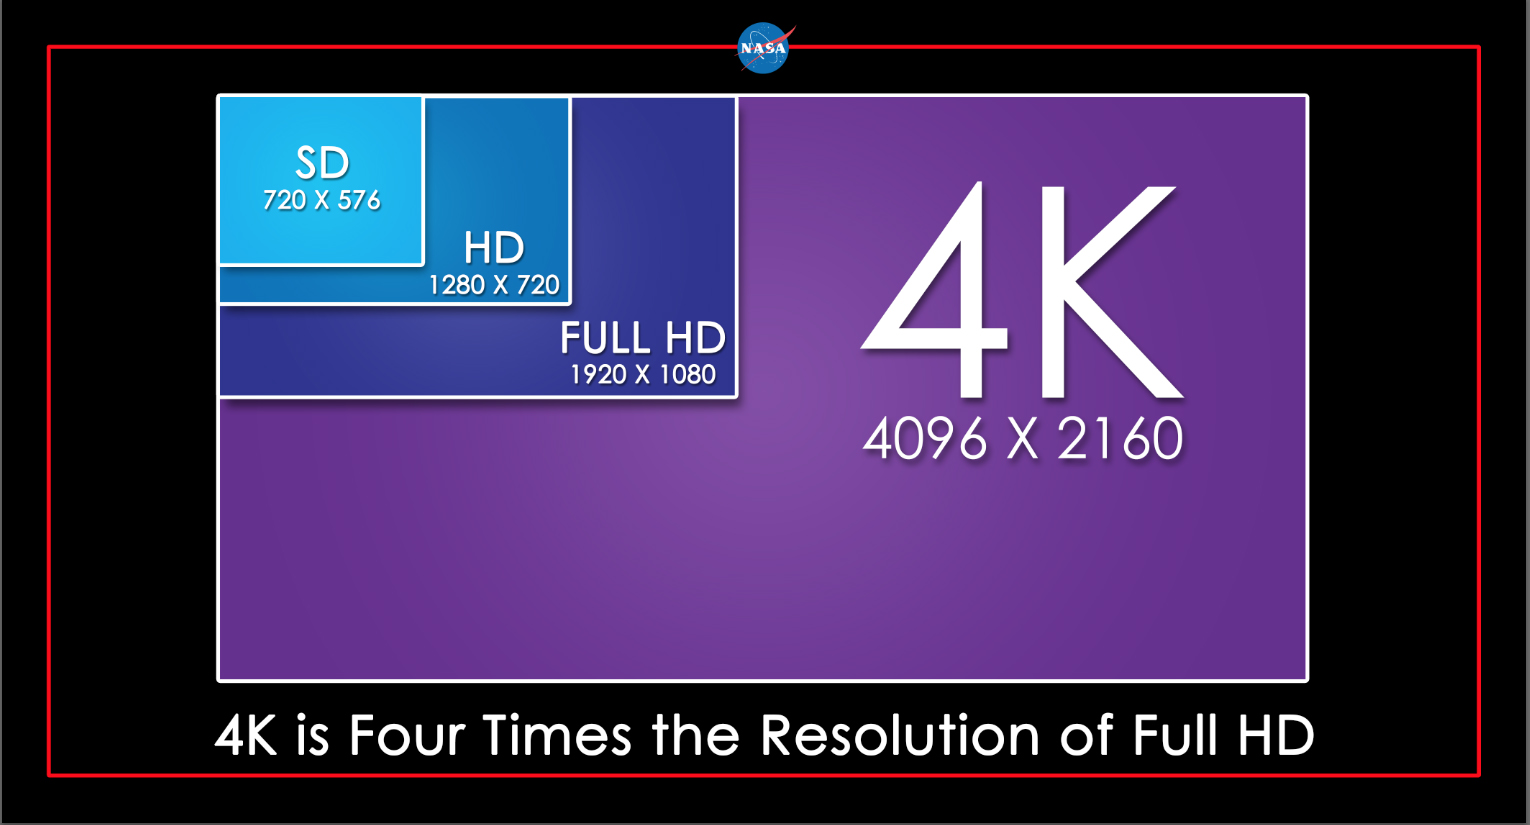 NASA TV launches first ever non-commercial consumer ultra-high definition (UHD) channel in North America